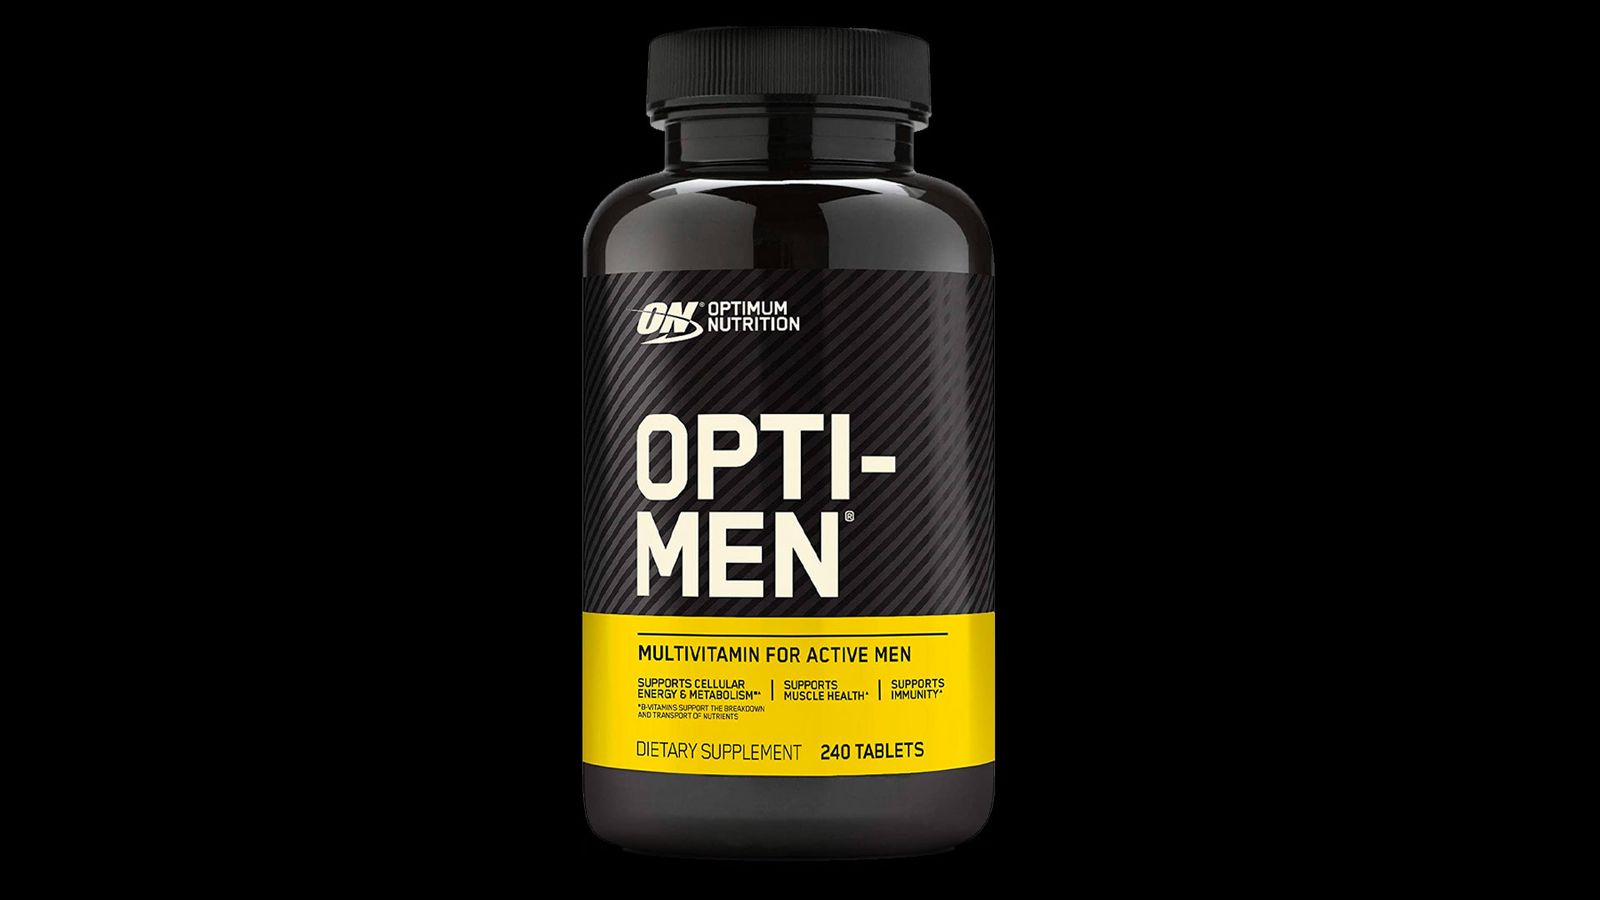 Optimum Nutrition Opti-Men product image of a black container with a yellow and white label.